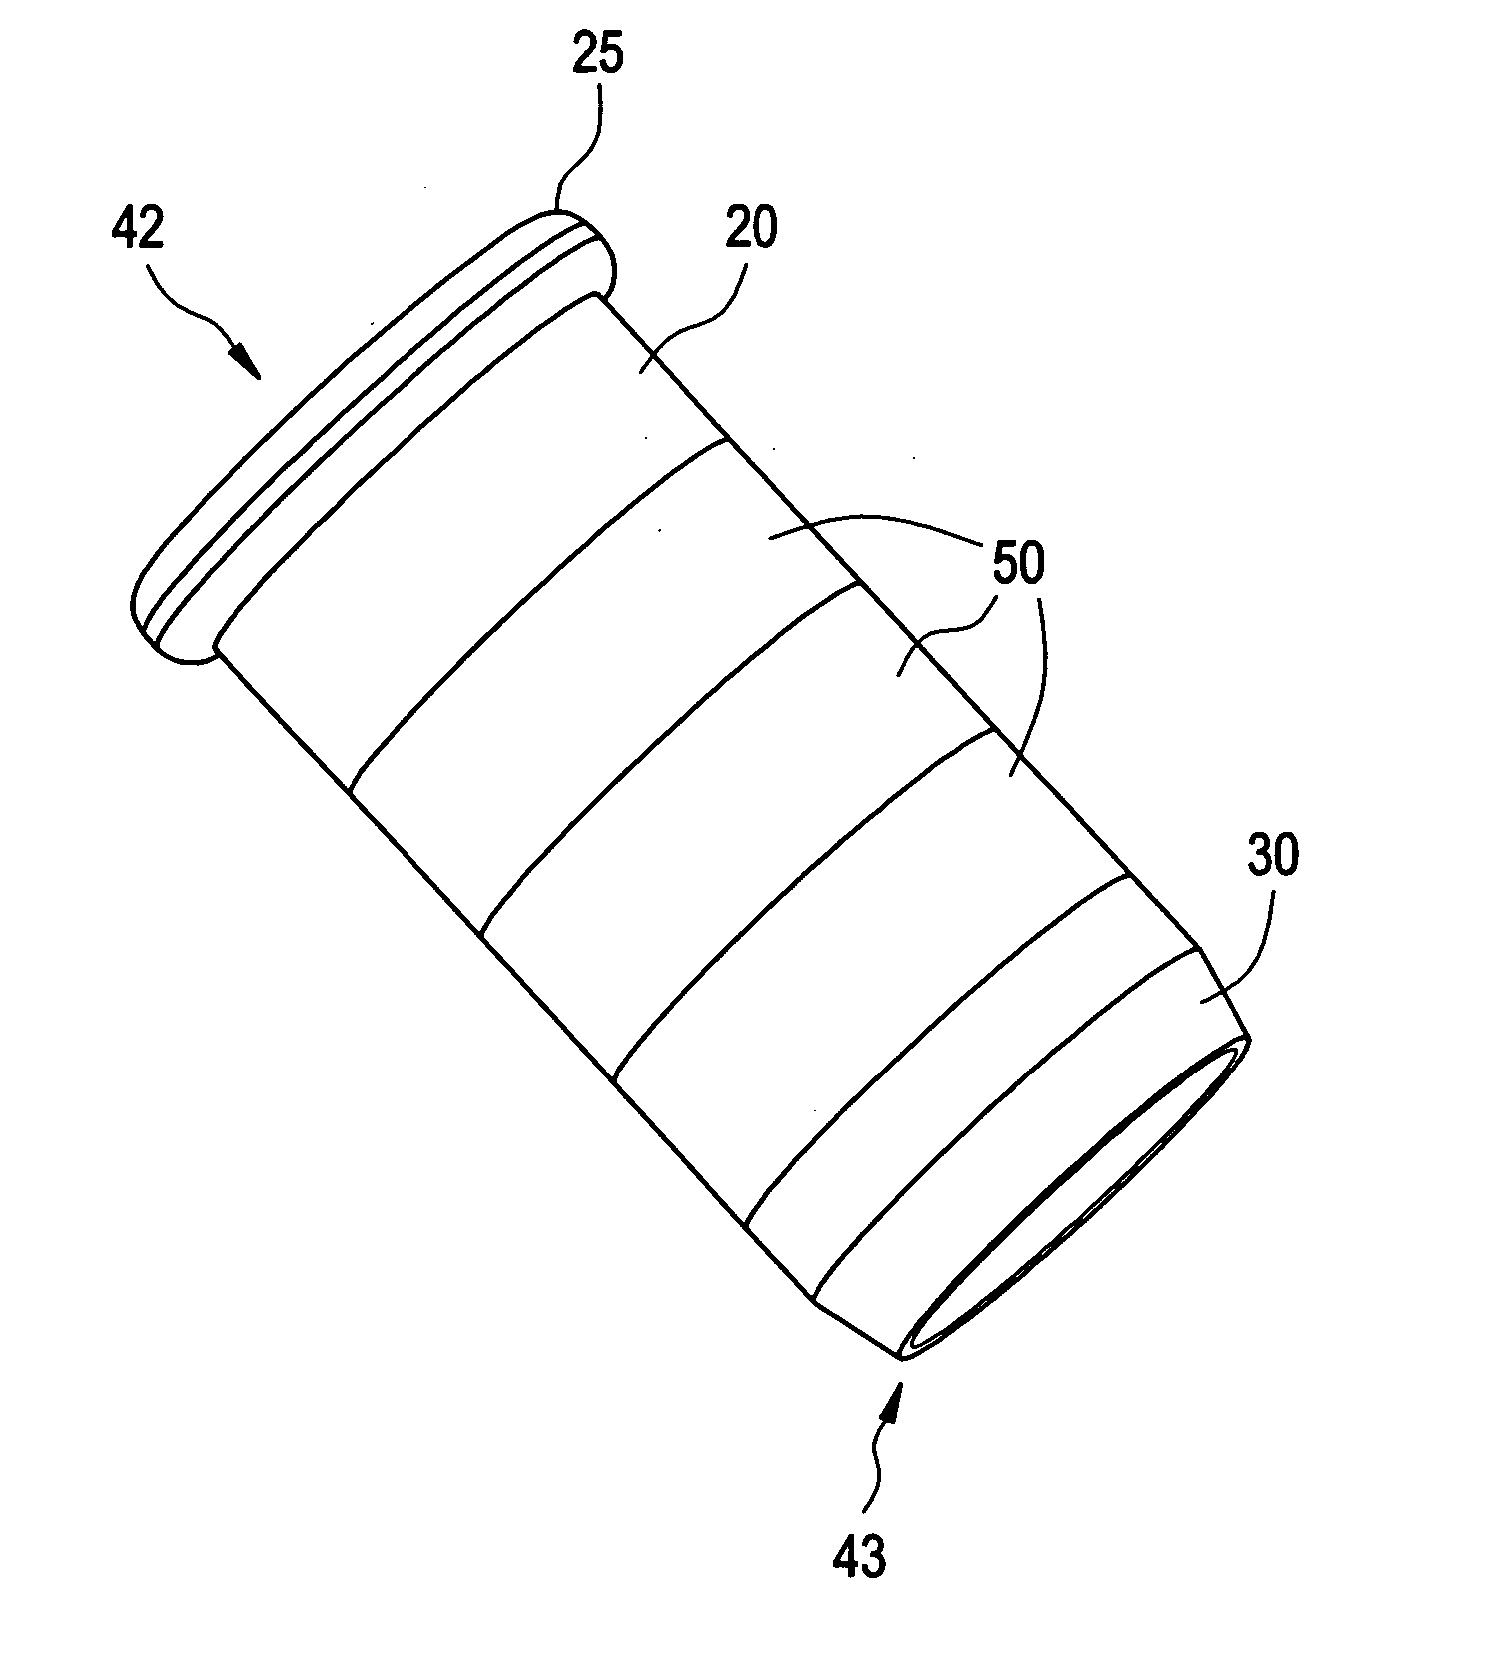 Adjustable access device for surgical procedures